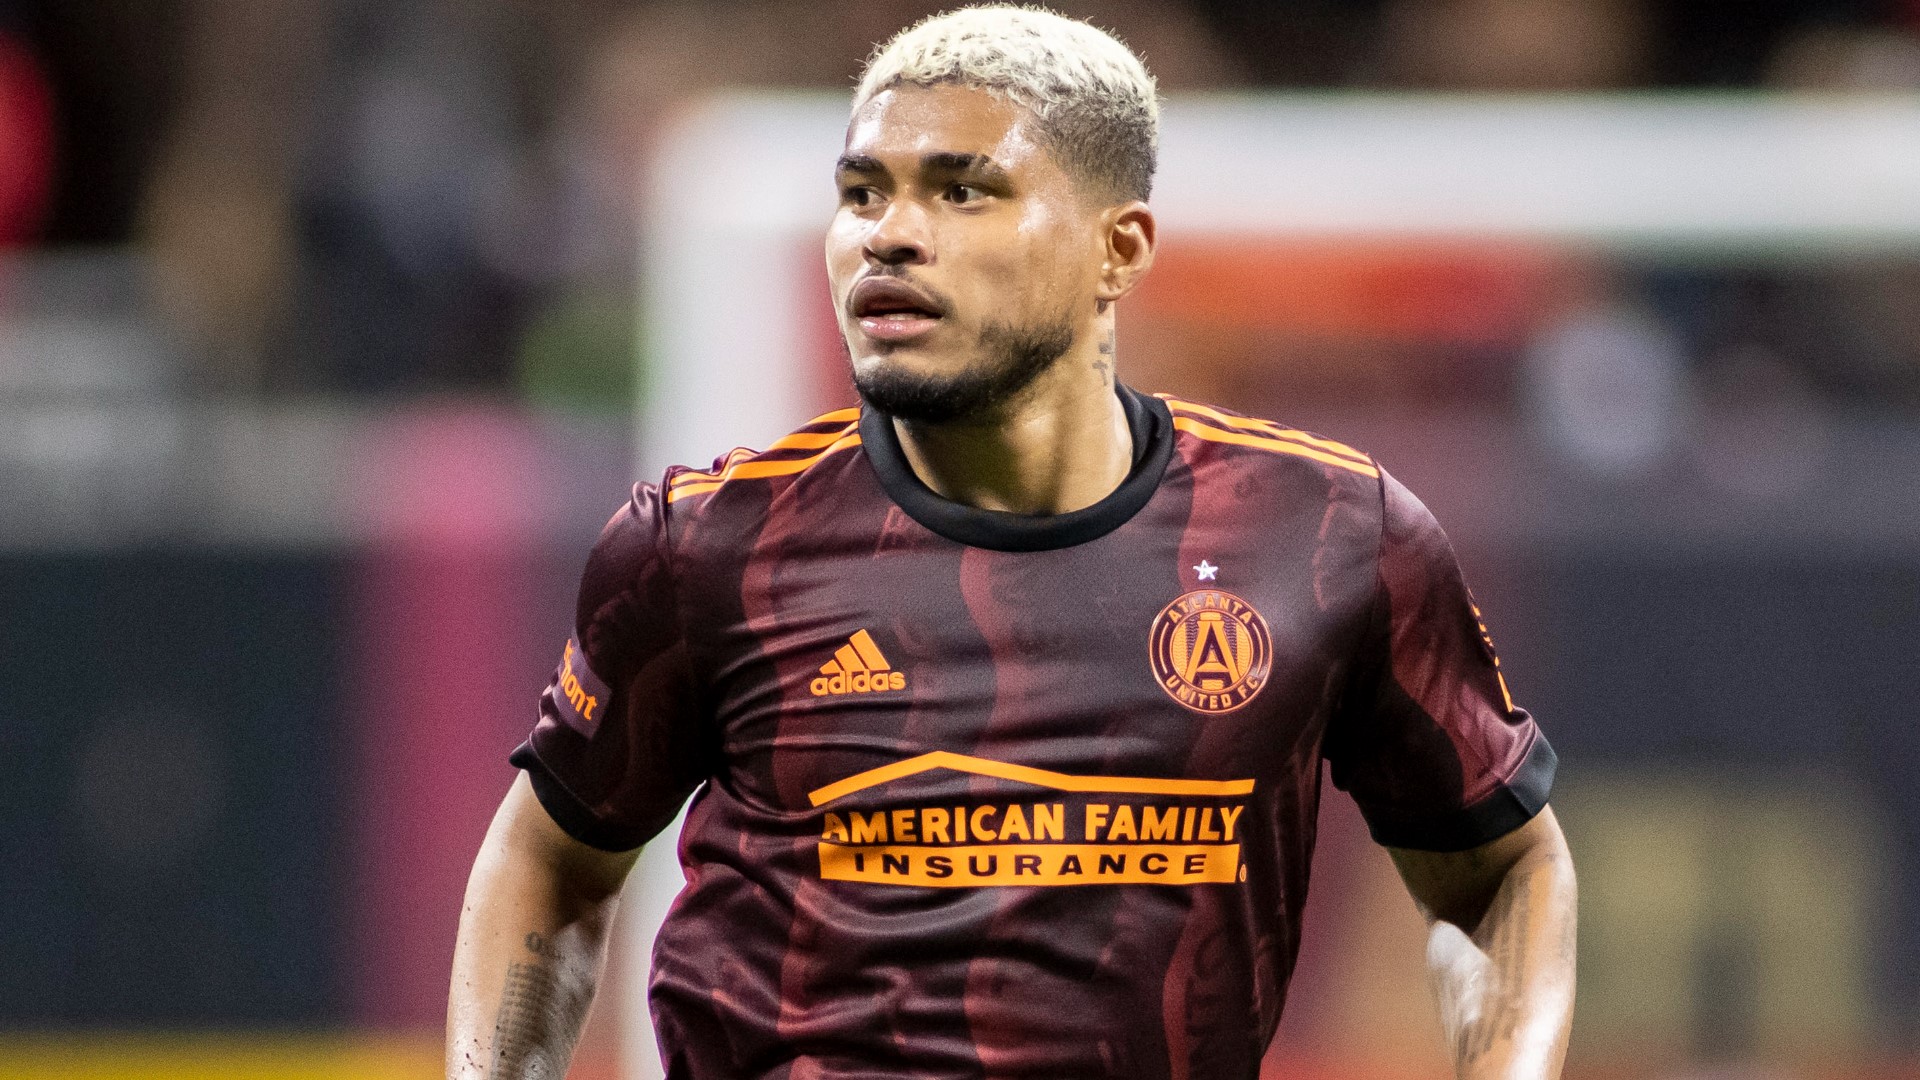 Following an underwhelming 2022 campaign filled with injuries, Atlanta United returned to the pitch this week for pre-season training.